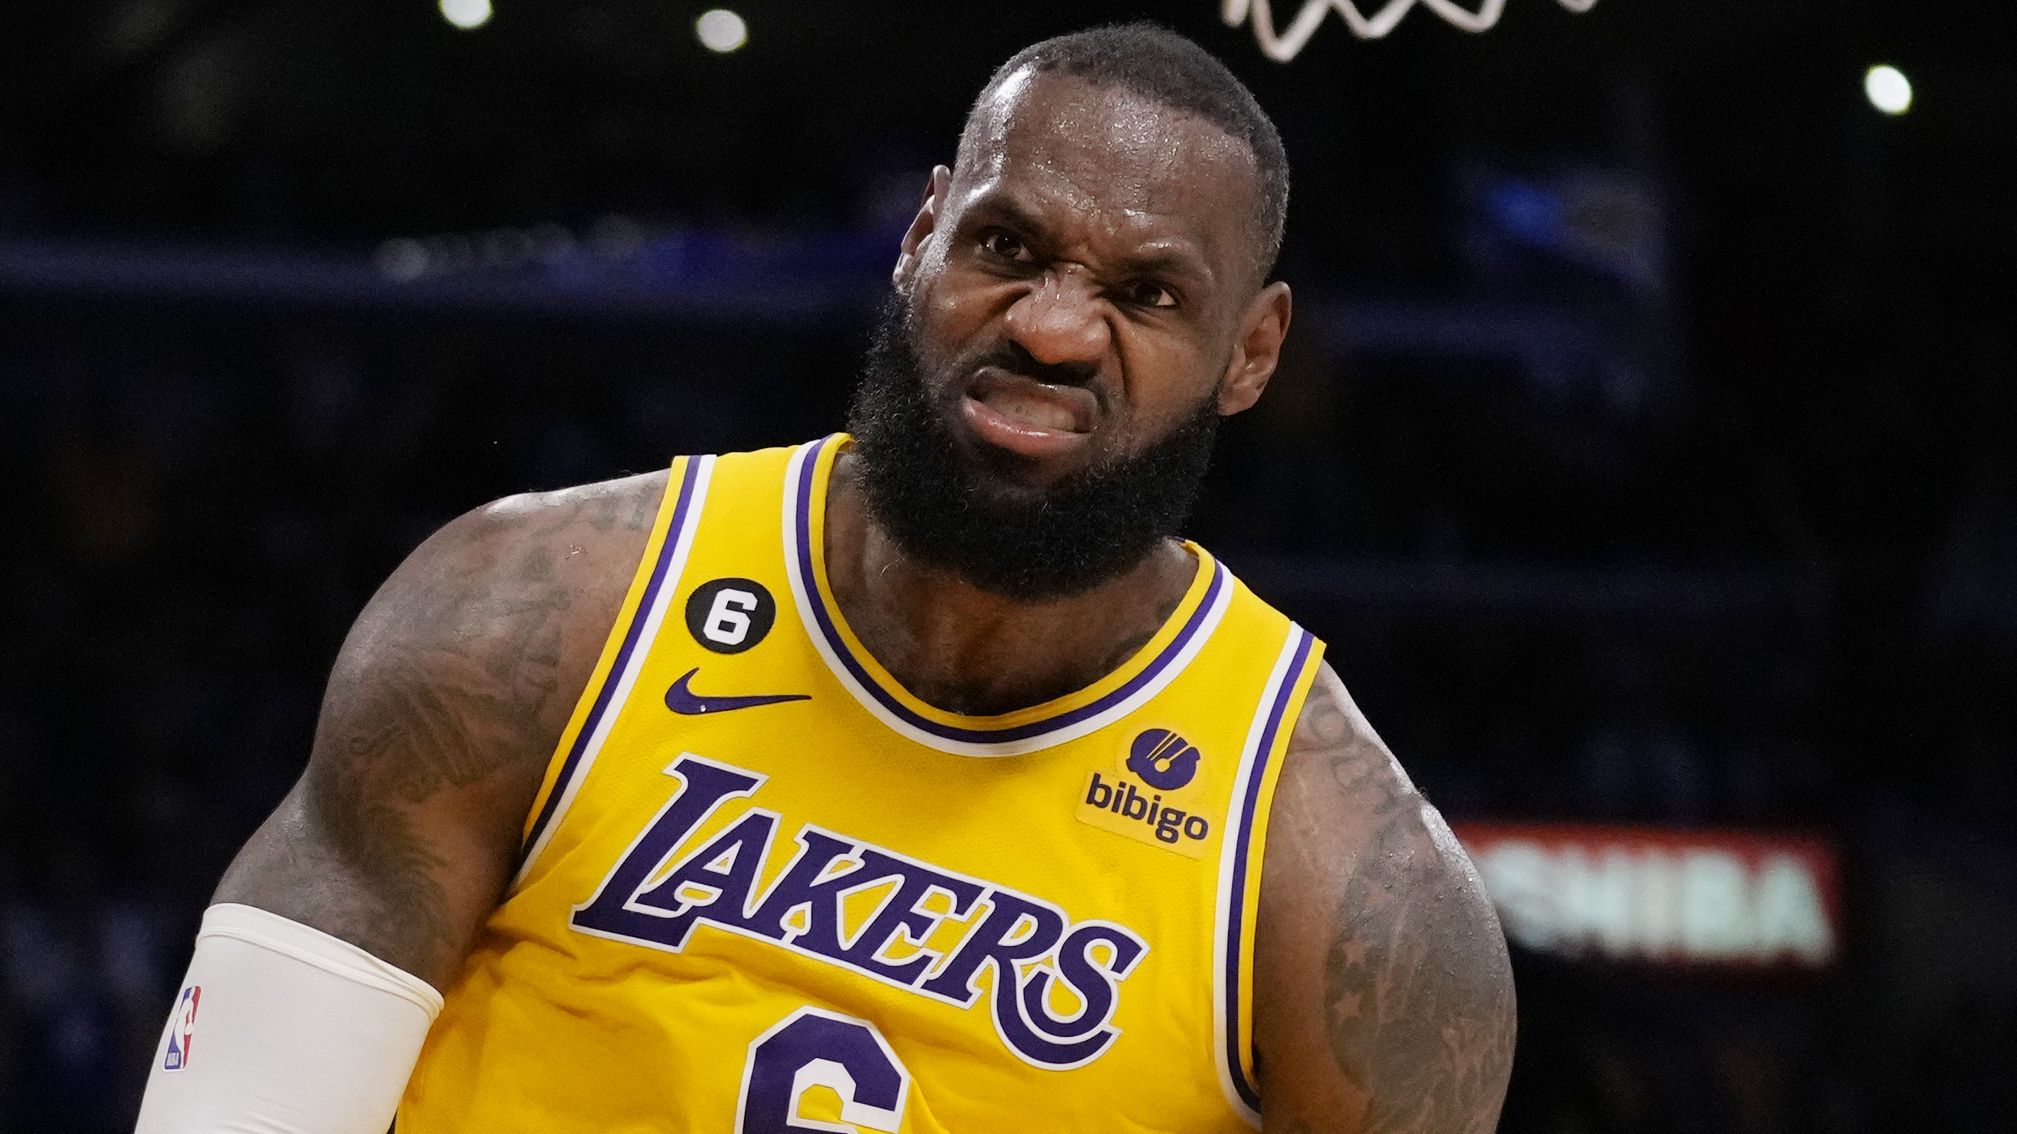 Los Angeles Lakers forward LeBron James (6) reacts after scoring during the second half in Game 6 of an NBA basketball Western Conference semifinal series against the Golden State Warriors Friday, May 12, 2023, in Los Angeles. (AP Photo/Ashley Landis)